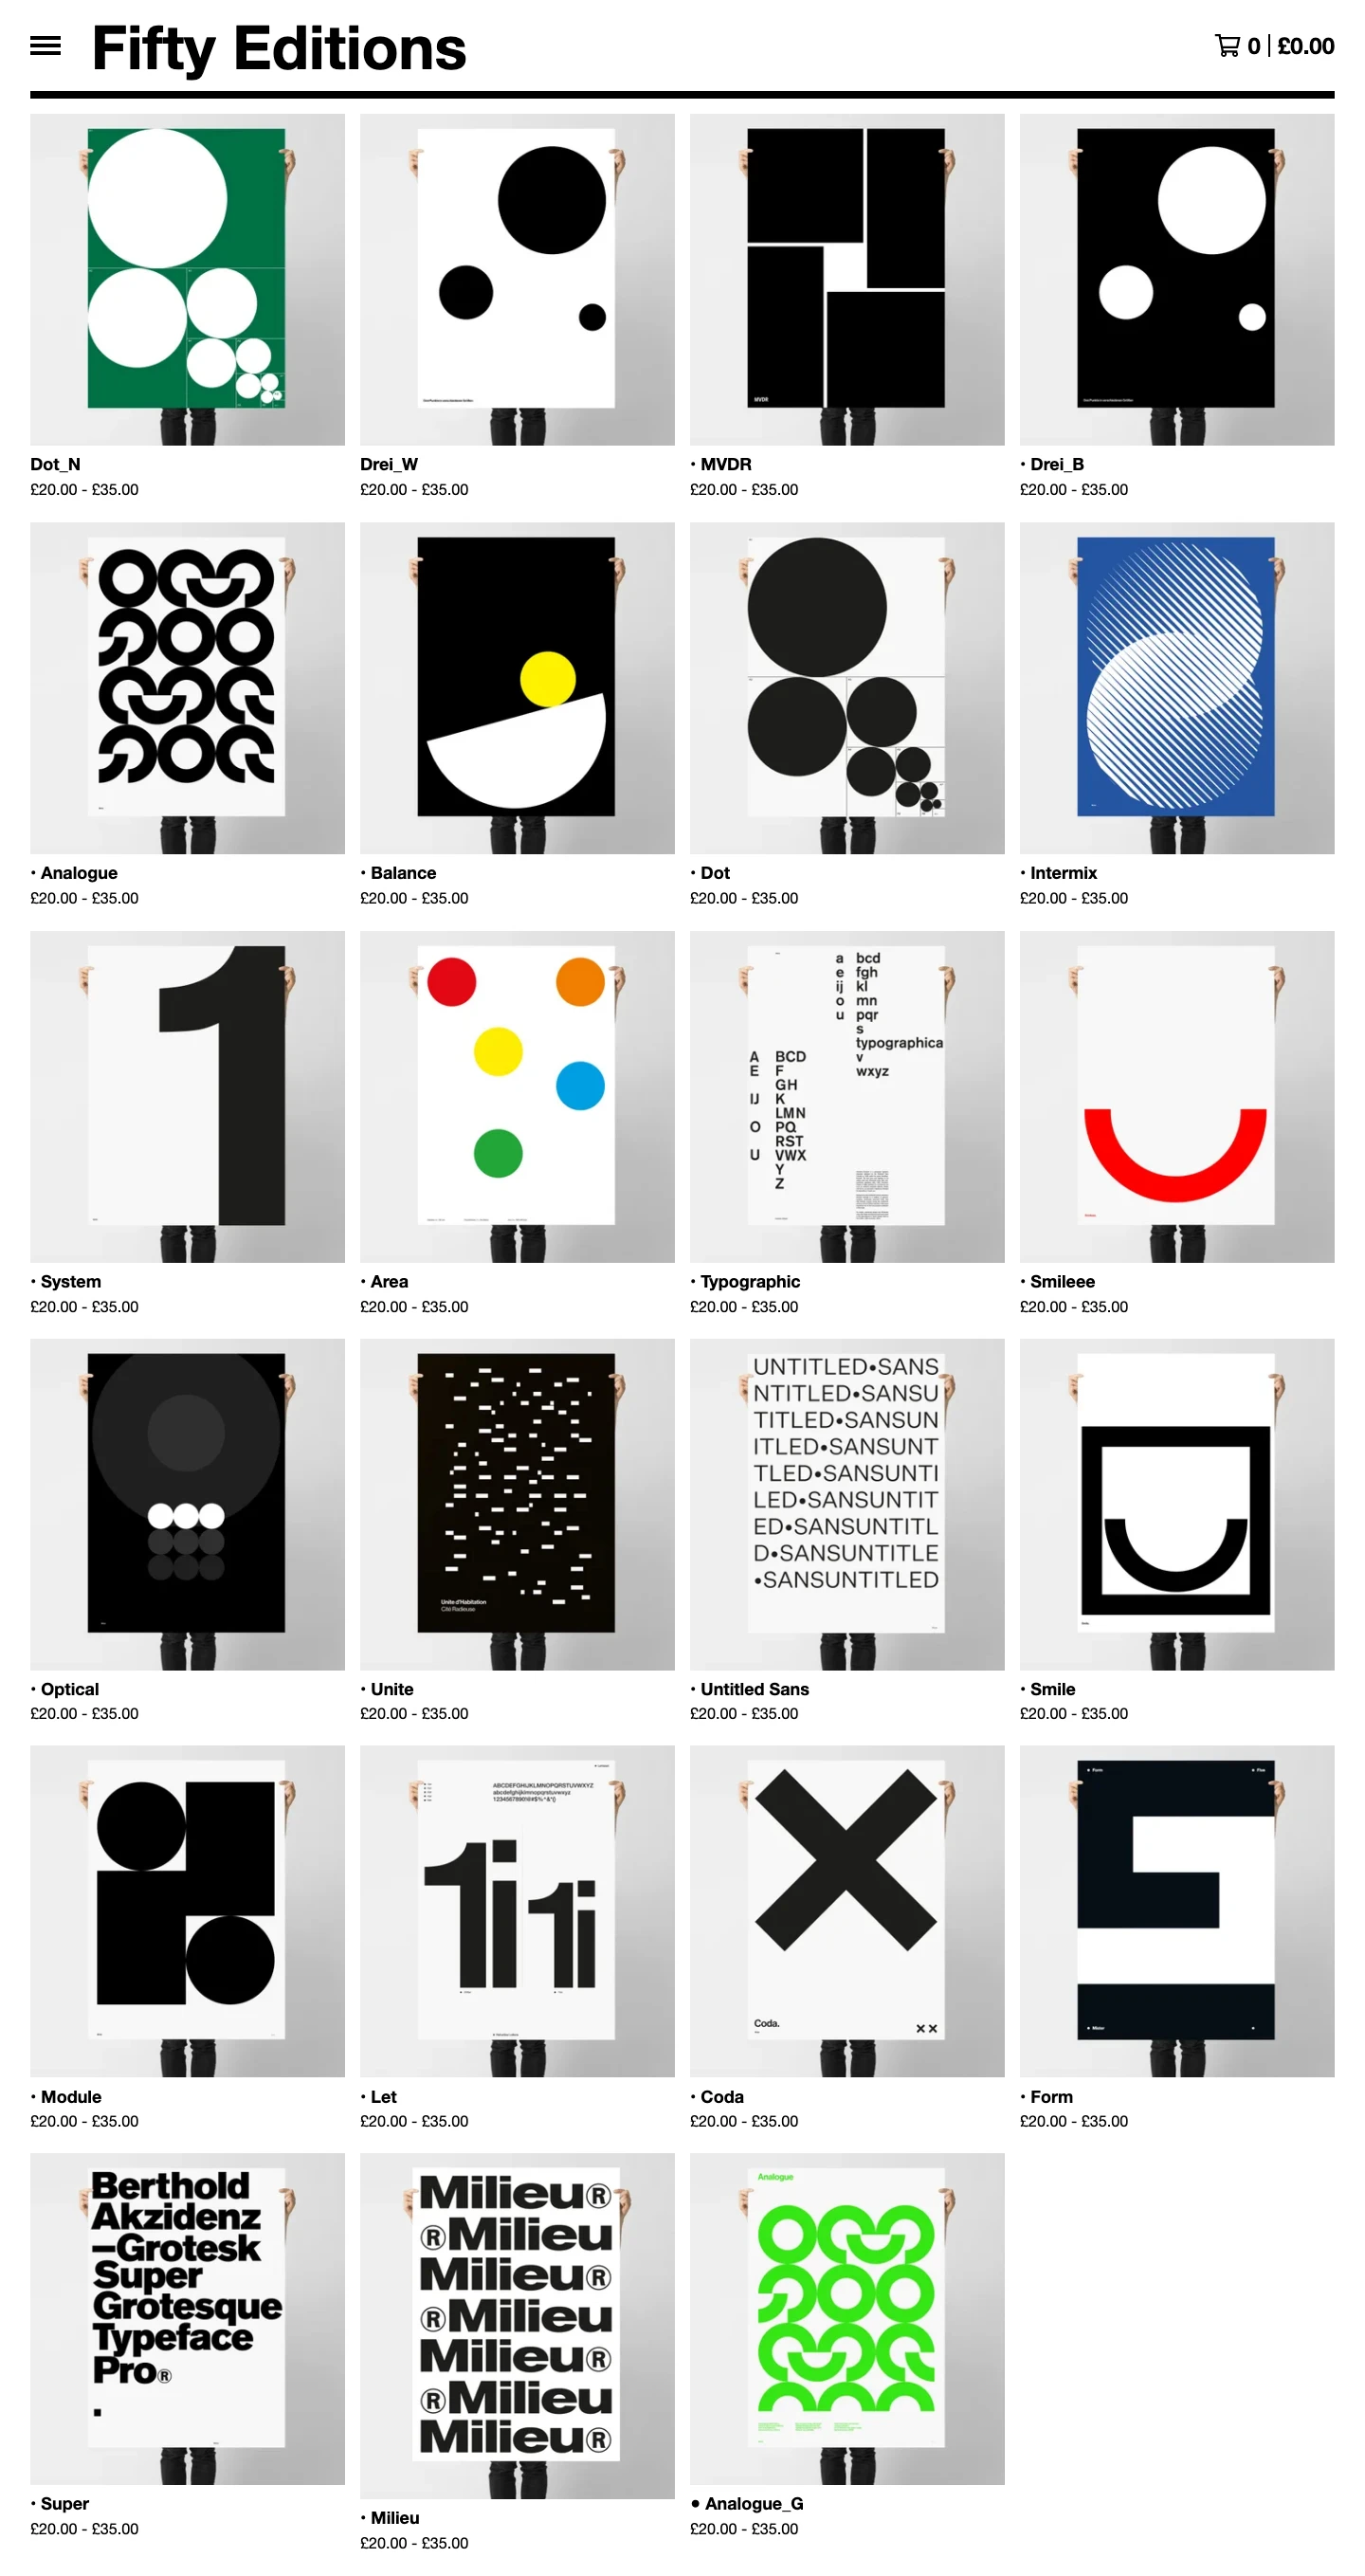 Fifty Editions Landing Page Example: 50 Editions is an online design store where you can buy original limited edition prints.